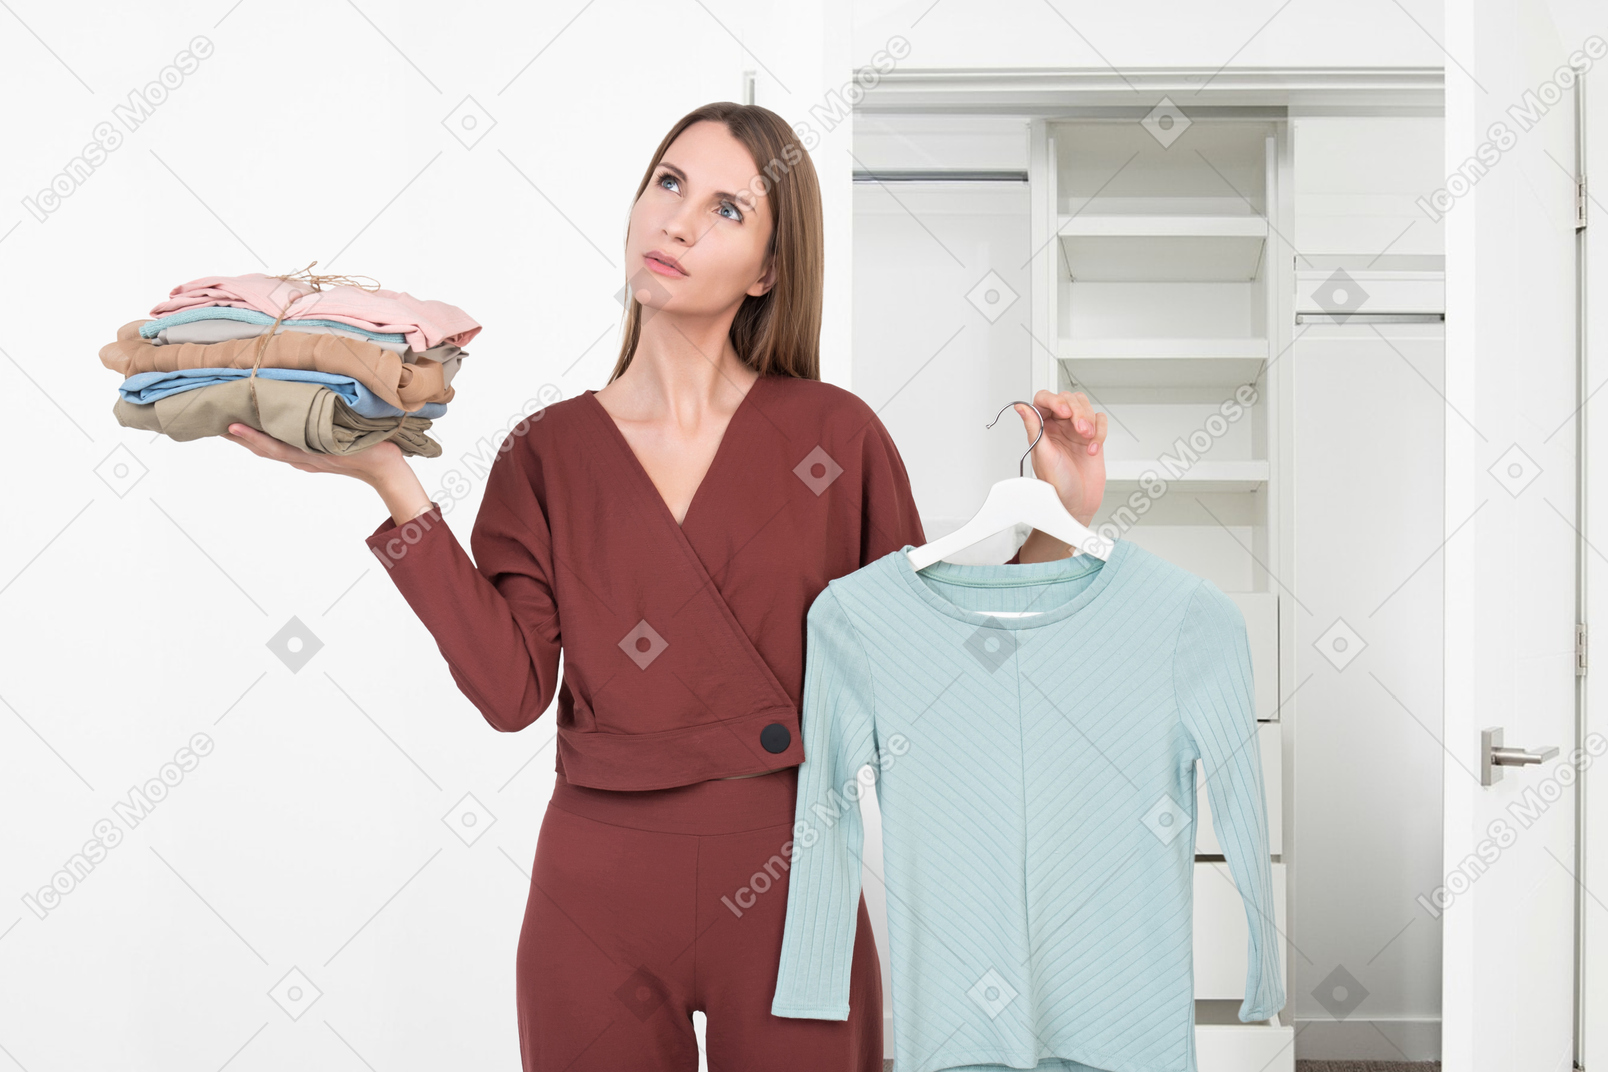 Woman thinking what to wear